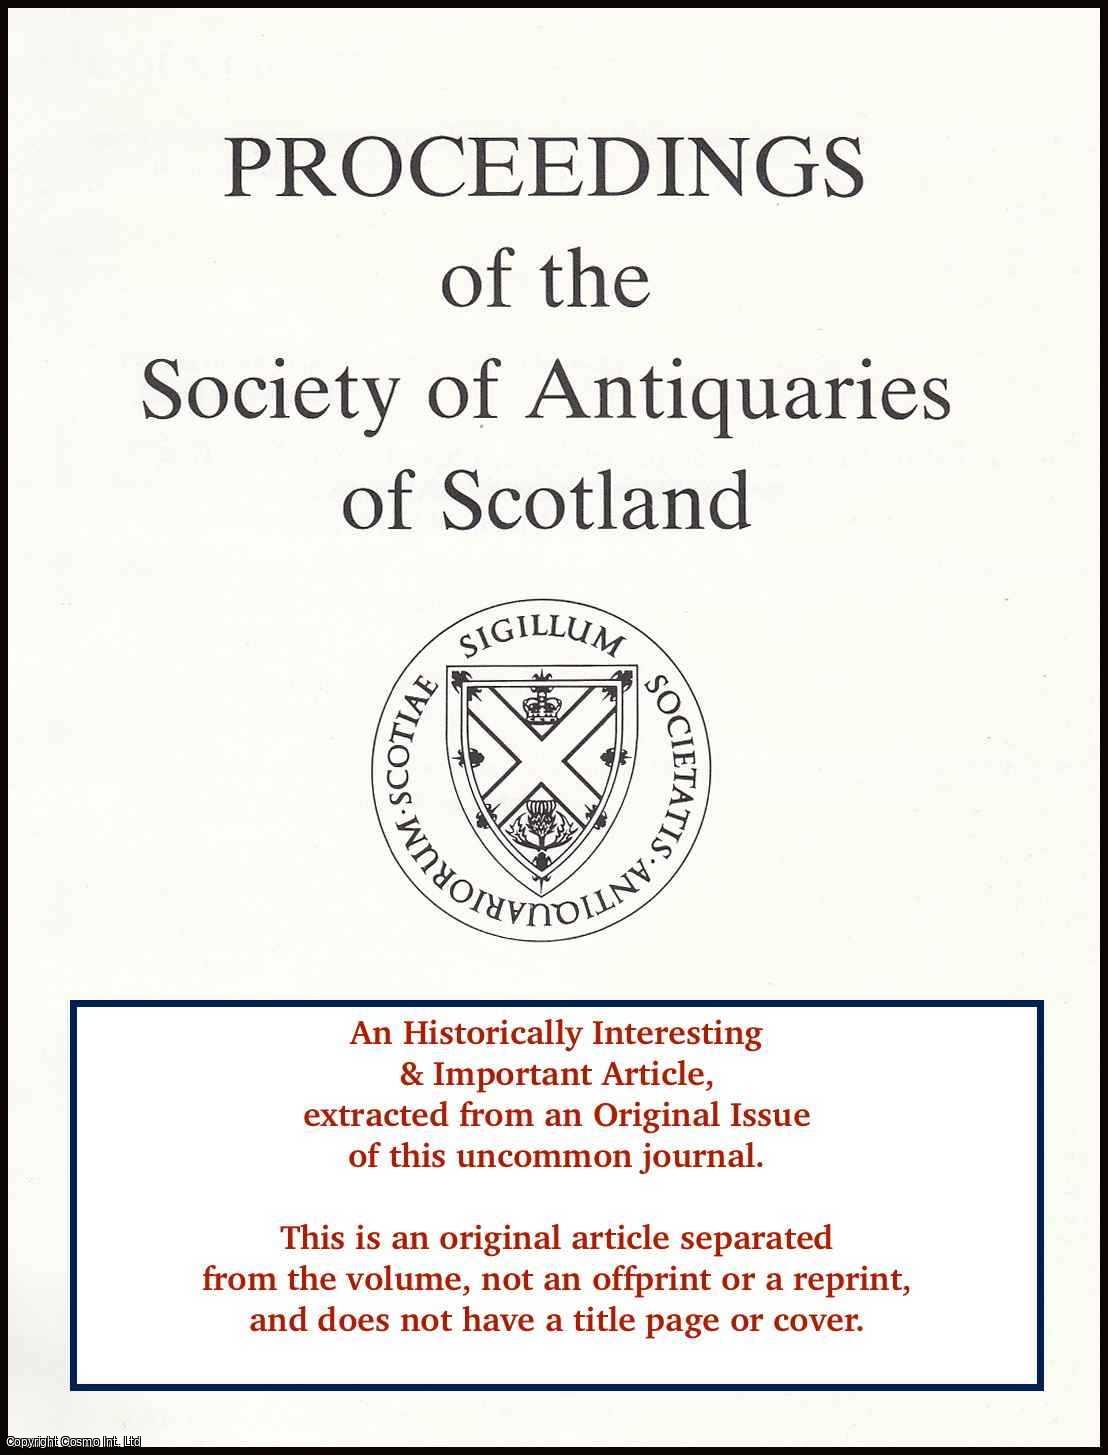 Leslie Alcock, Elizabeth A. Alcock & Sally M. Foster - 1986. Reconnaissance Excavations on Early Historic Fortifications and other Royal Sites in Scotland, 1974-84: 1, Excavations near St Abb's Head, Berwickshire, 1980.